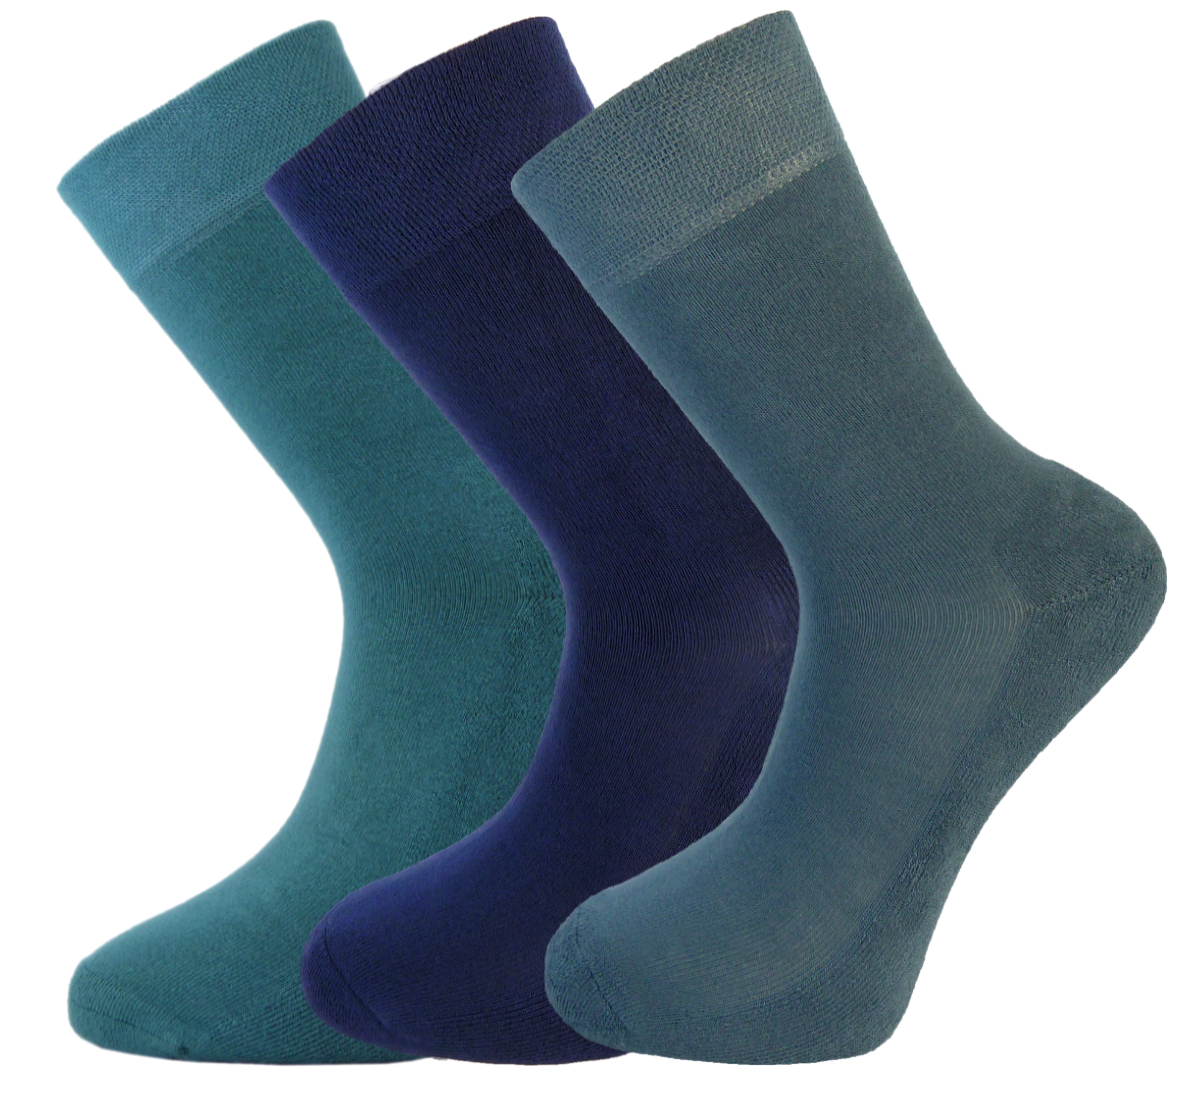 Green Bear Unisex Bamboo socks - Extra Cushioned Sole - 3 multi colour pack - Luxurious soft & antibacterial bamboo